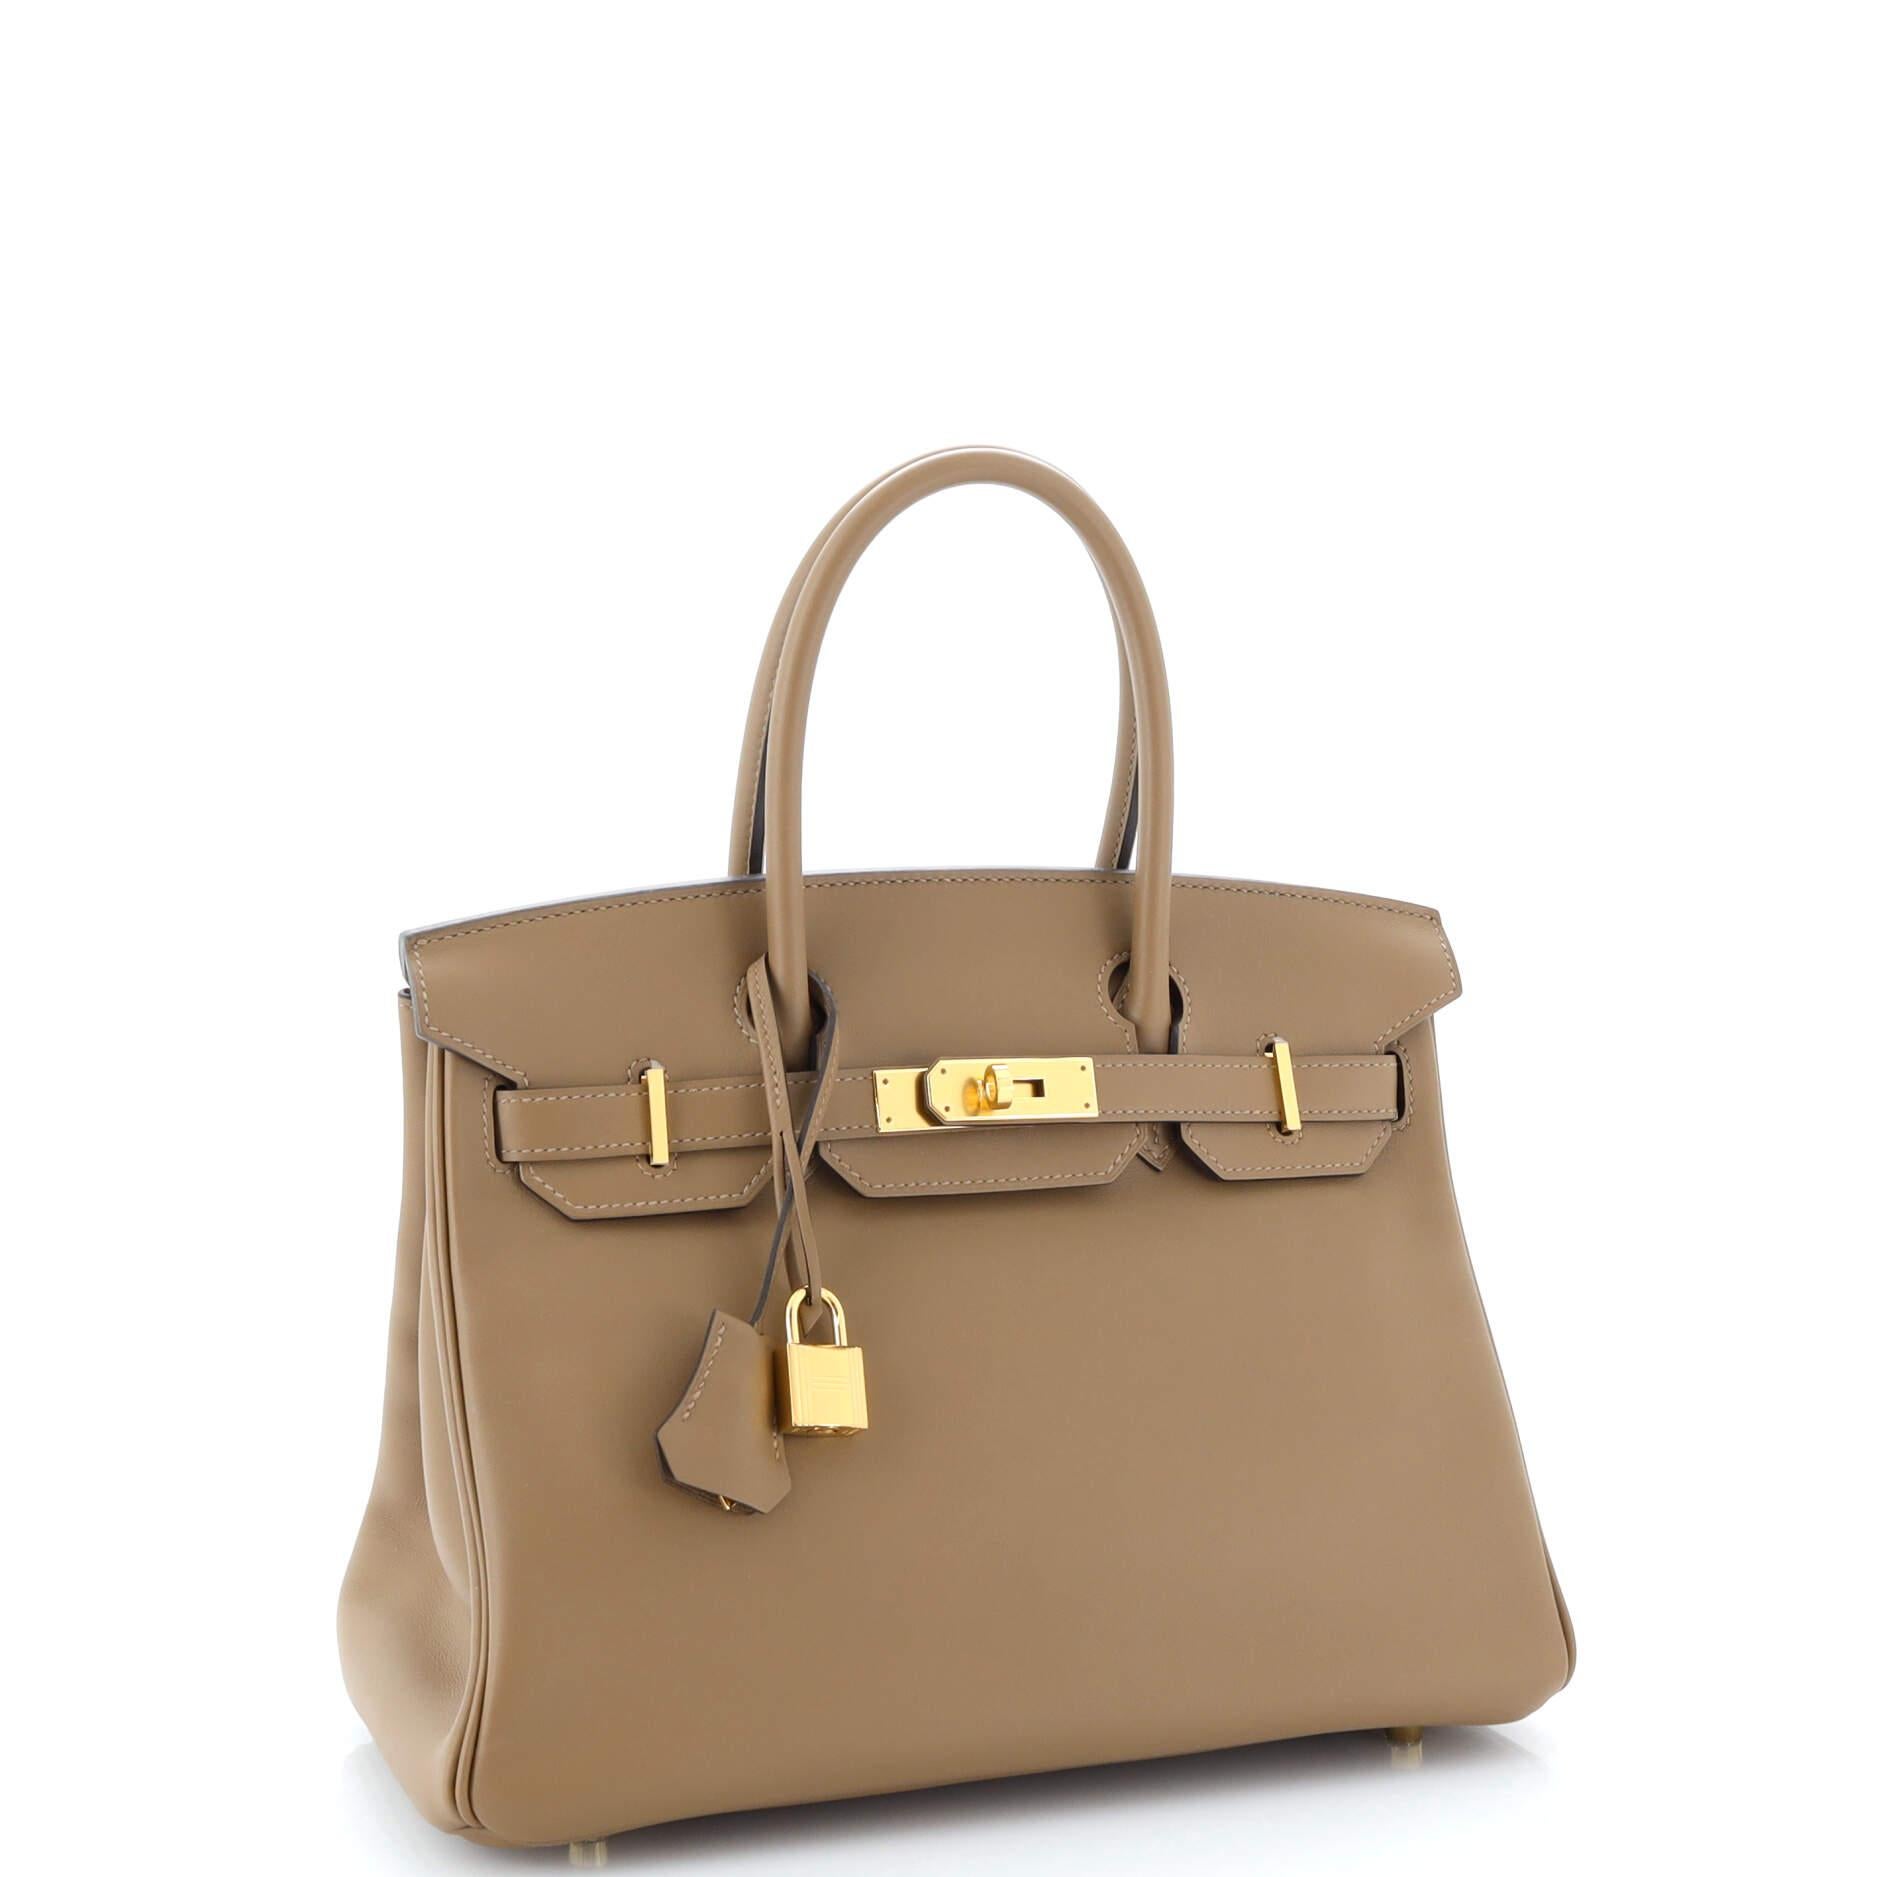 Hermes Birkin Handbag Beige De Weimar Jonathan with Gold Hardware 30 In Good Condition For Sale In NY, NY